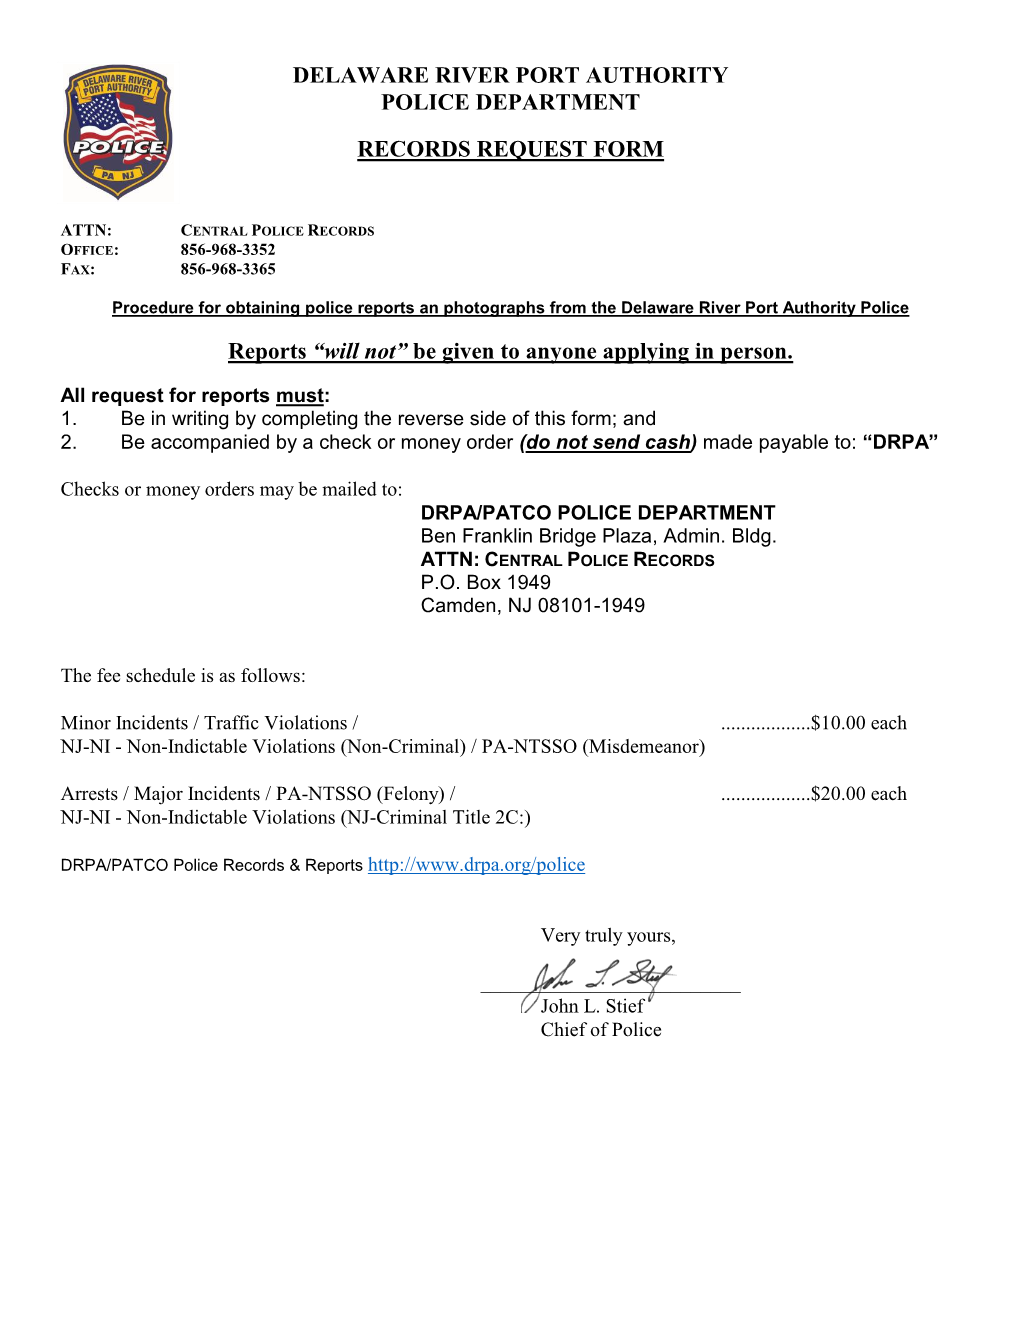 DRPA Police Records Request